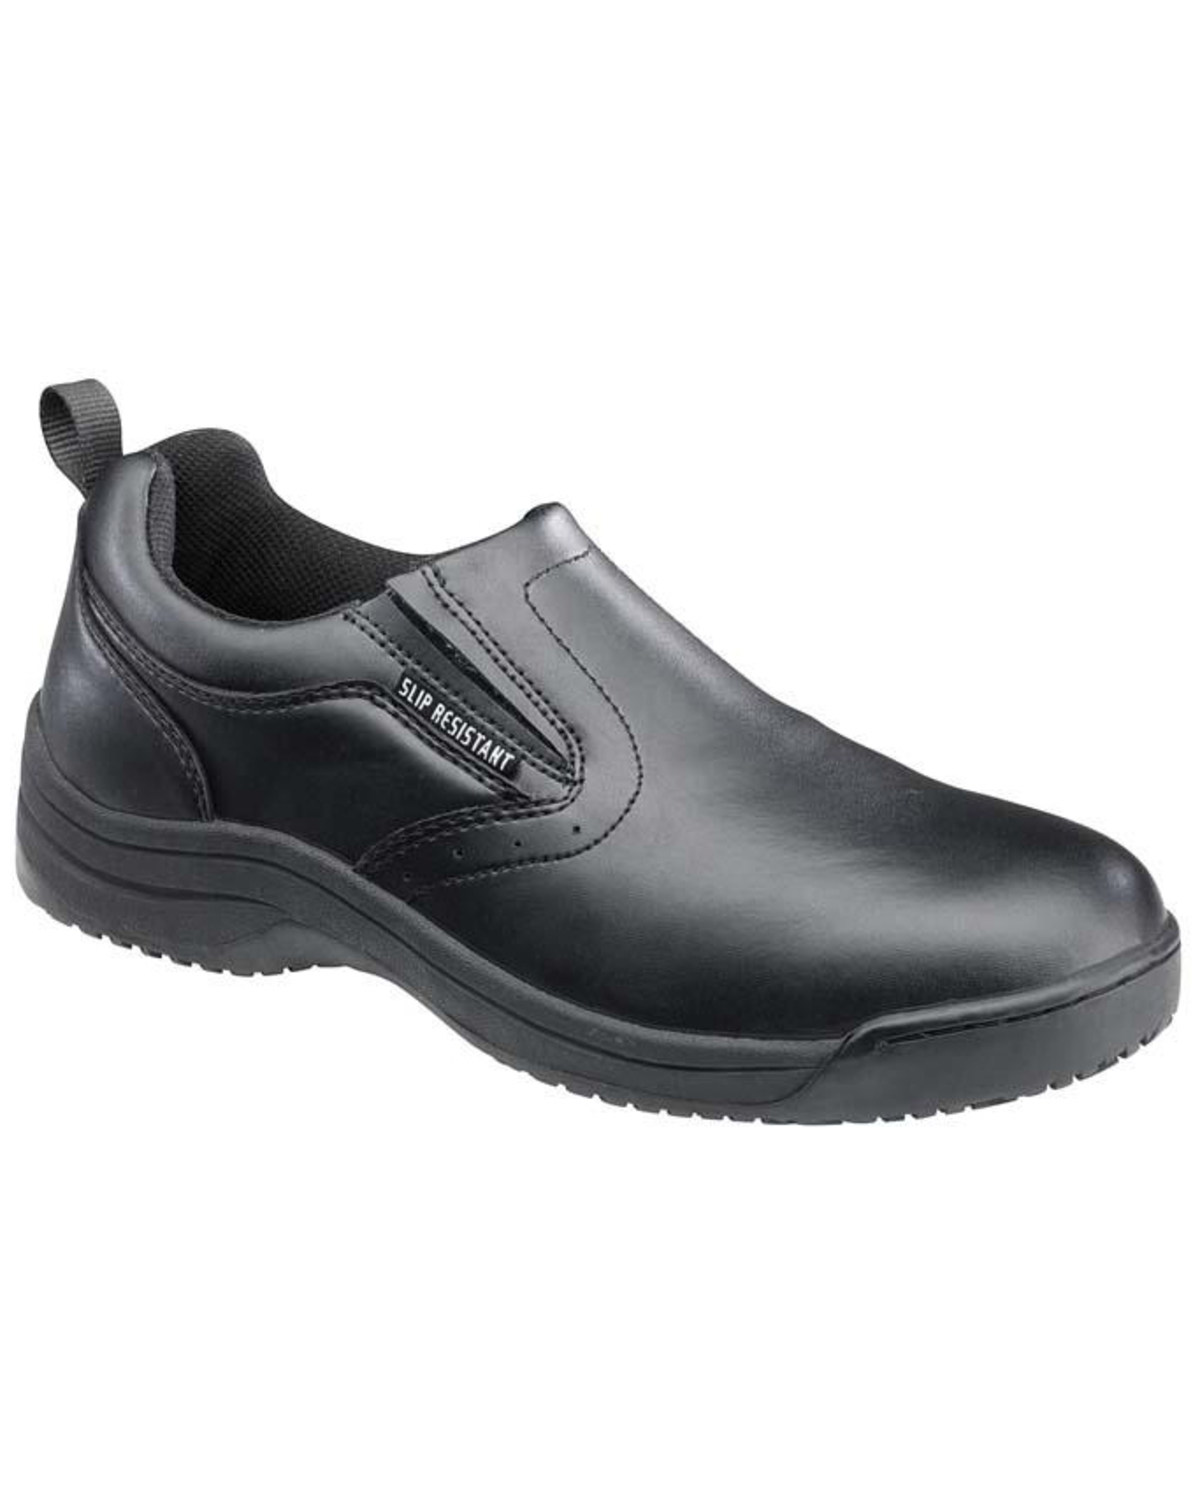 skid proof shoes for work